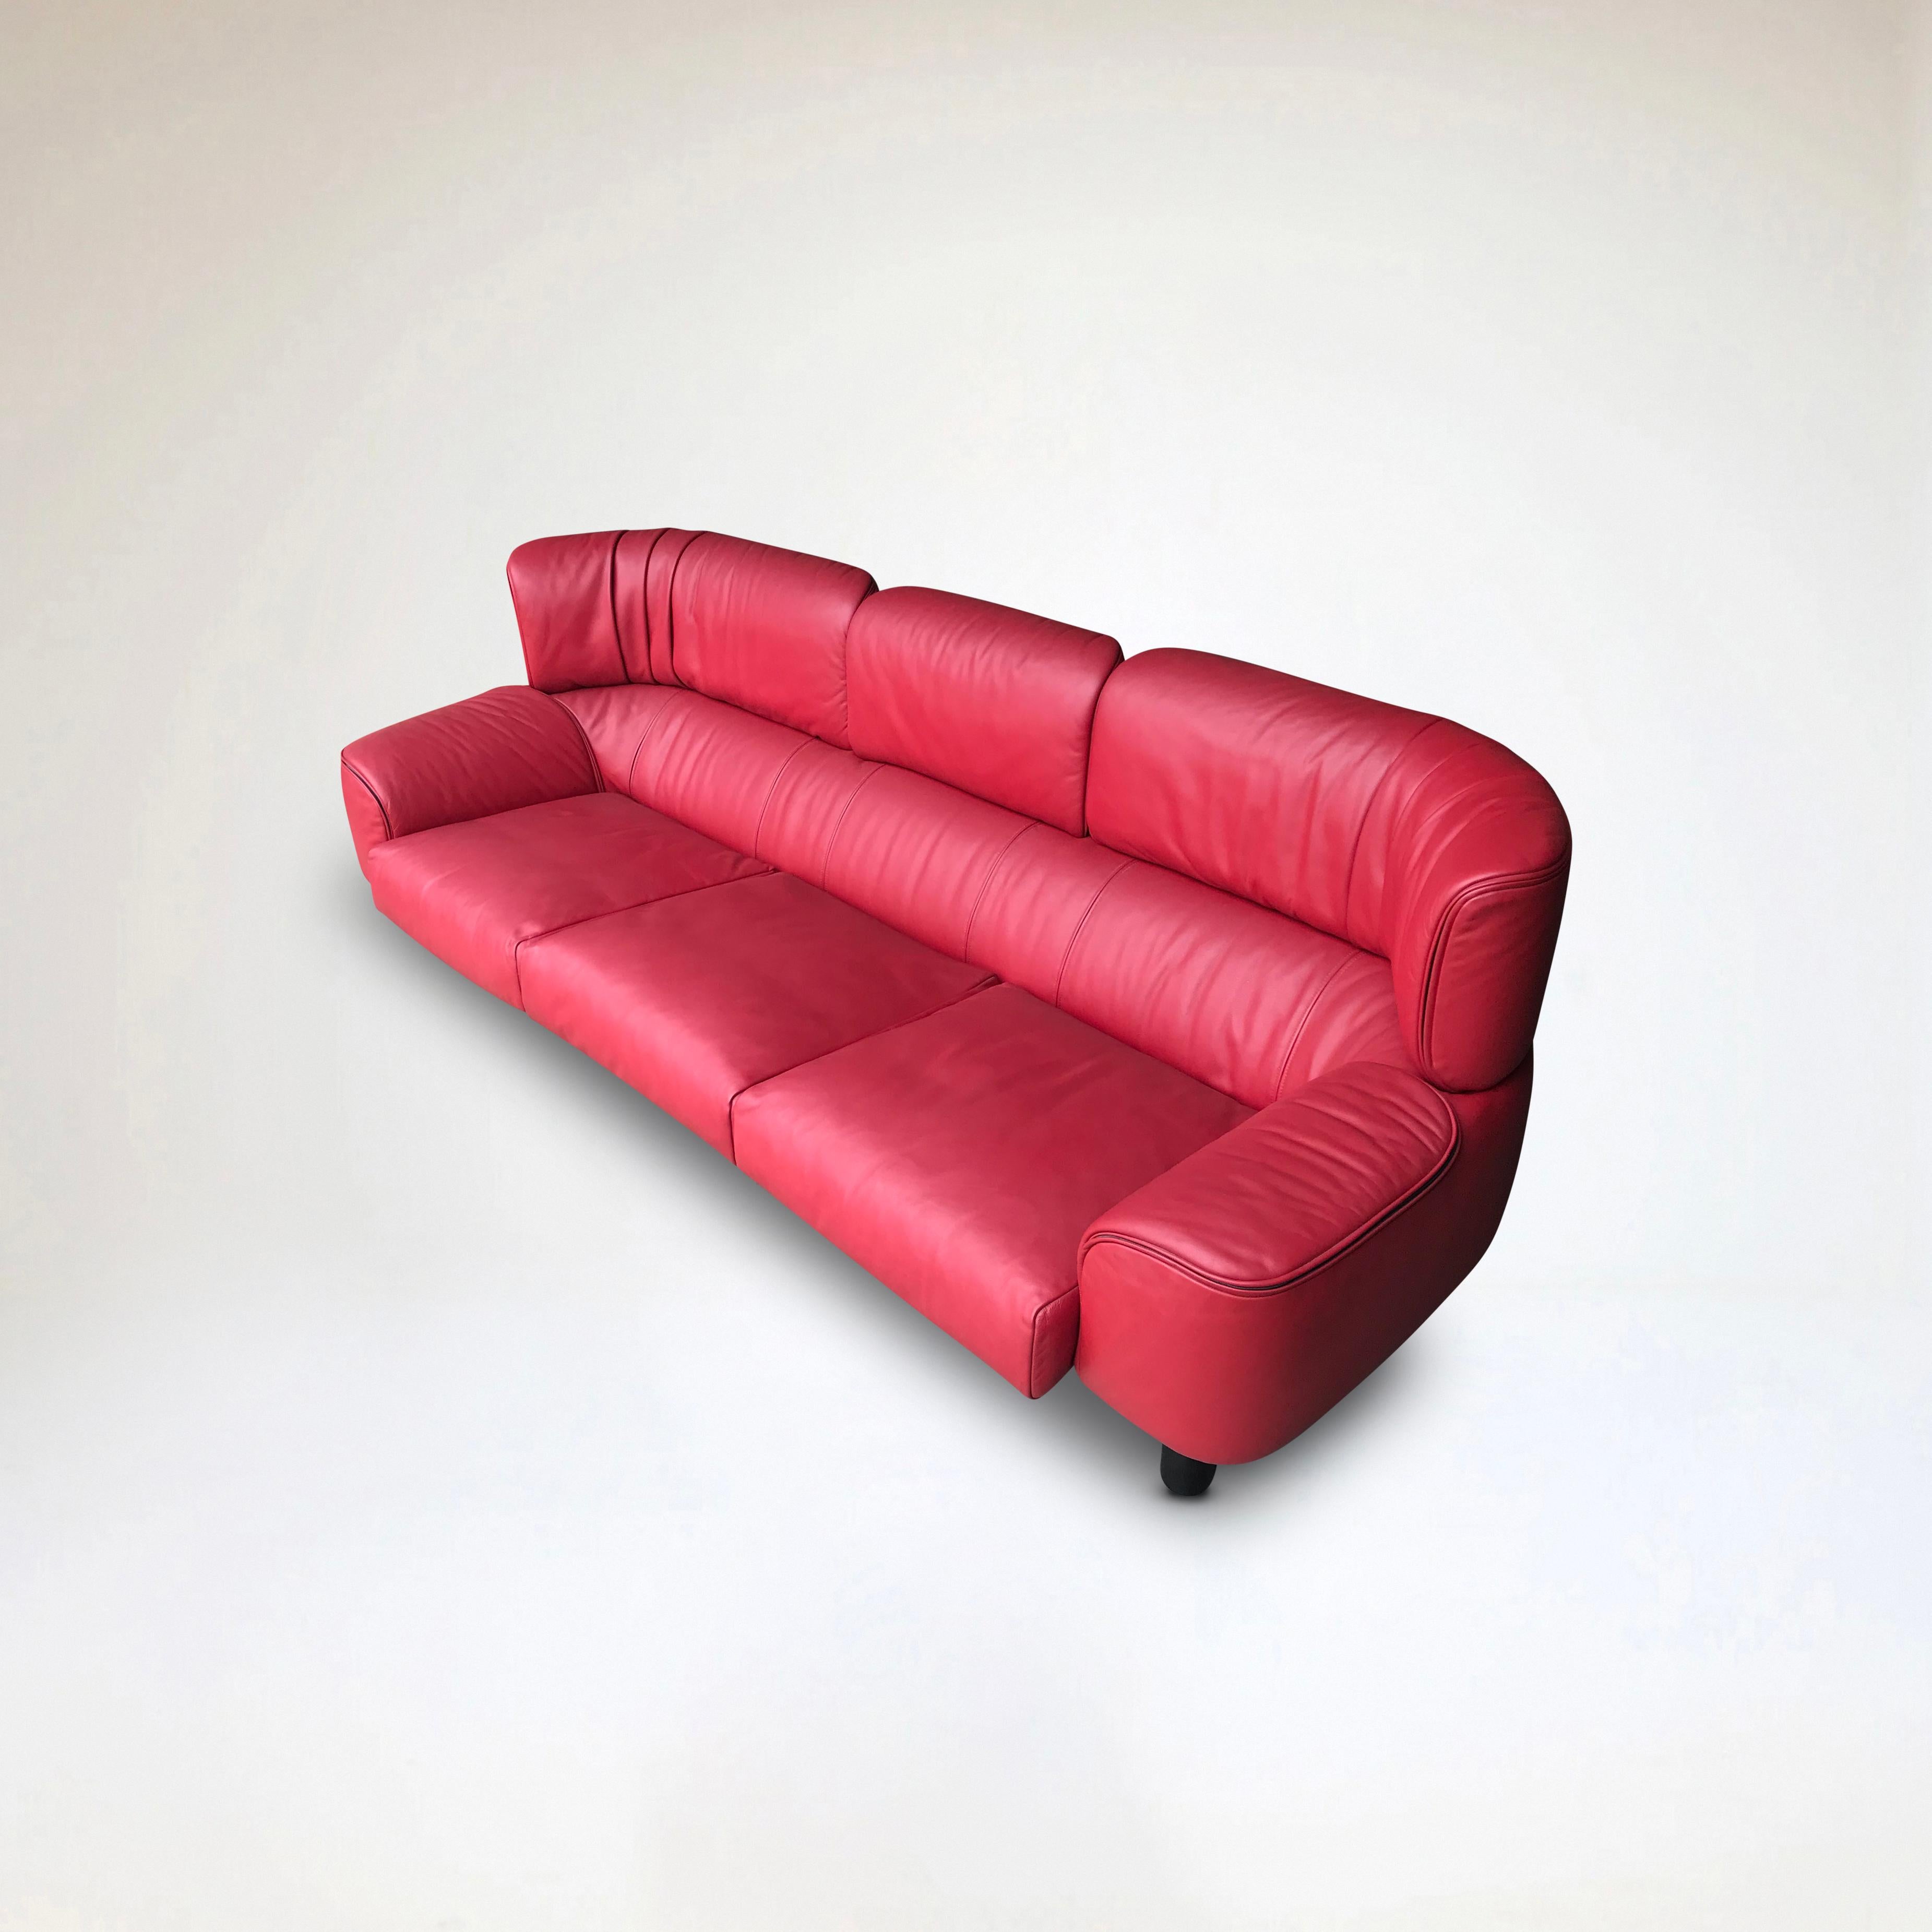 Bull 3-seater red leather sofa by Gianfranco Frattini for Cassina 1987 For Sale 5